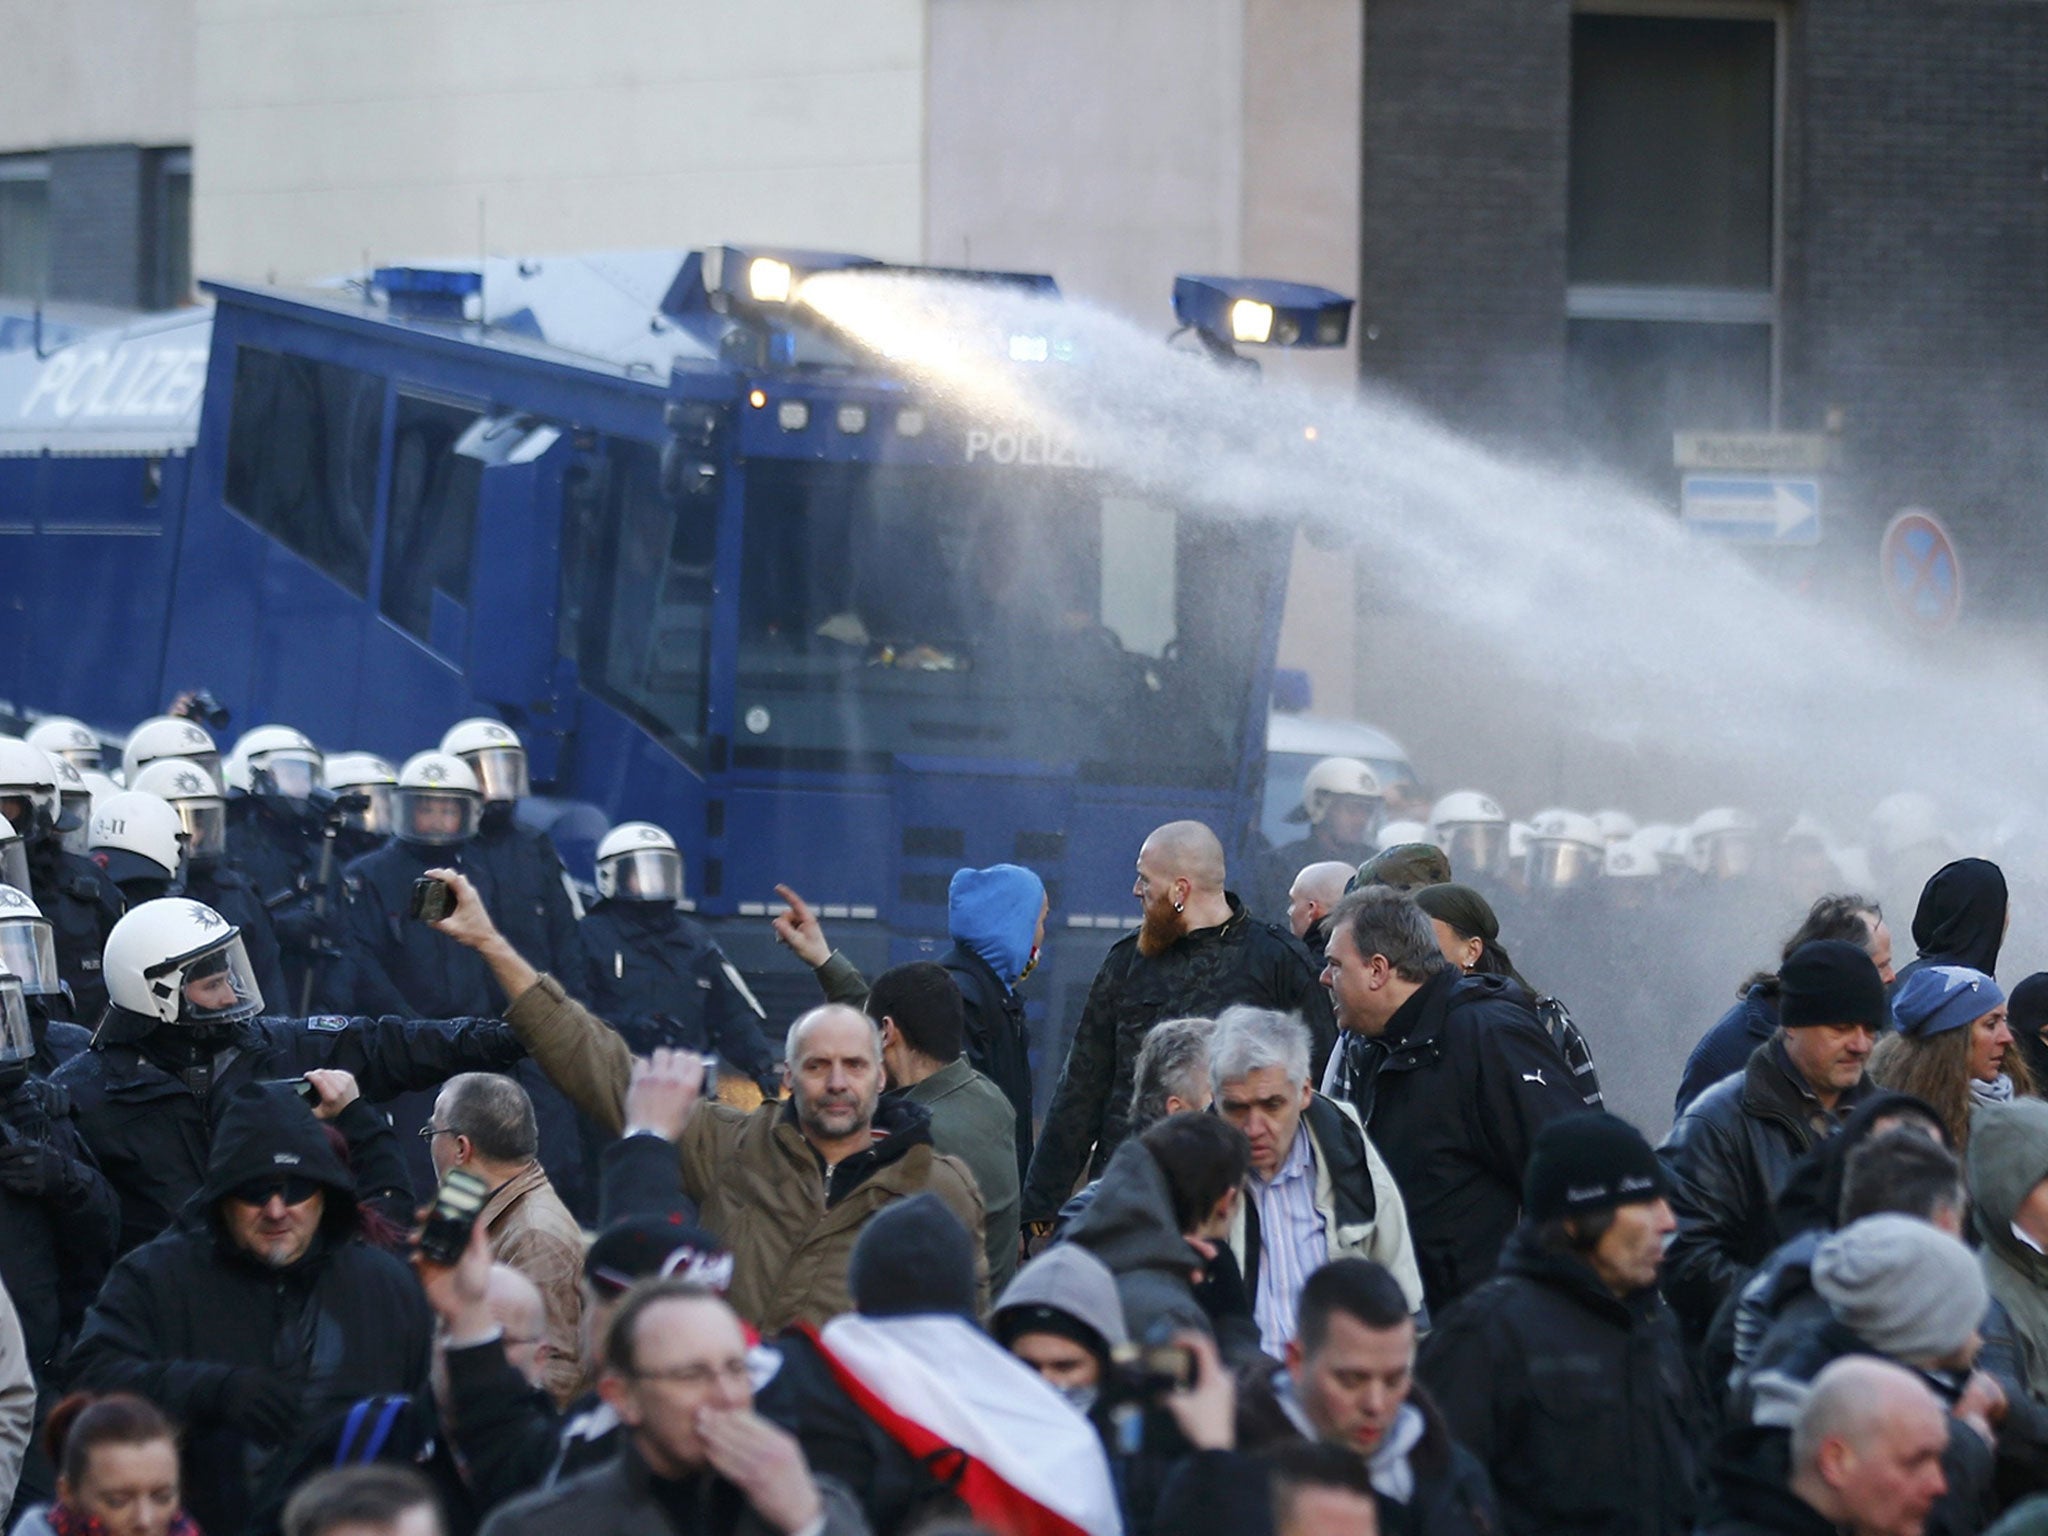 Police use a water cannon during a protest march by supporters of anti-immigration right-wing movement Pegida in Cologne, Germany, January 9, 2016